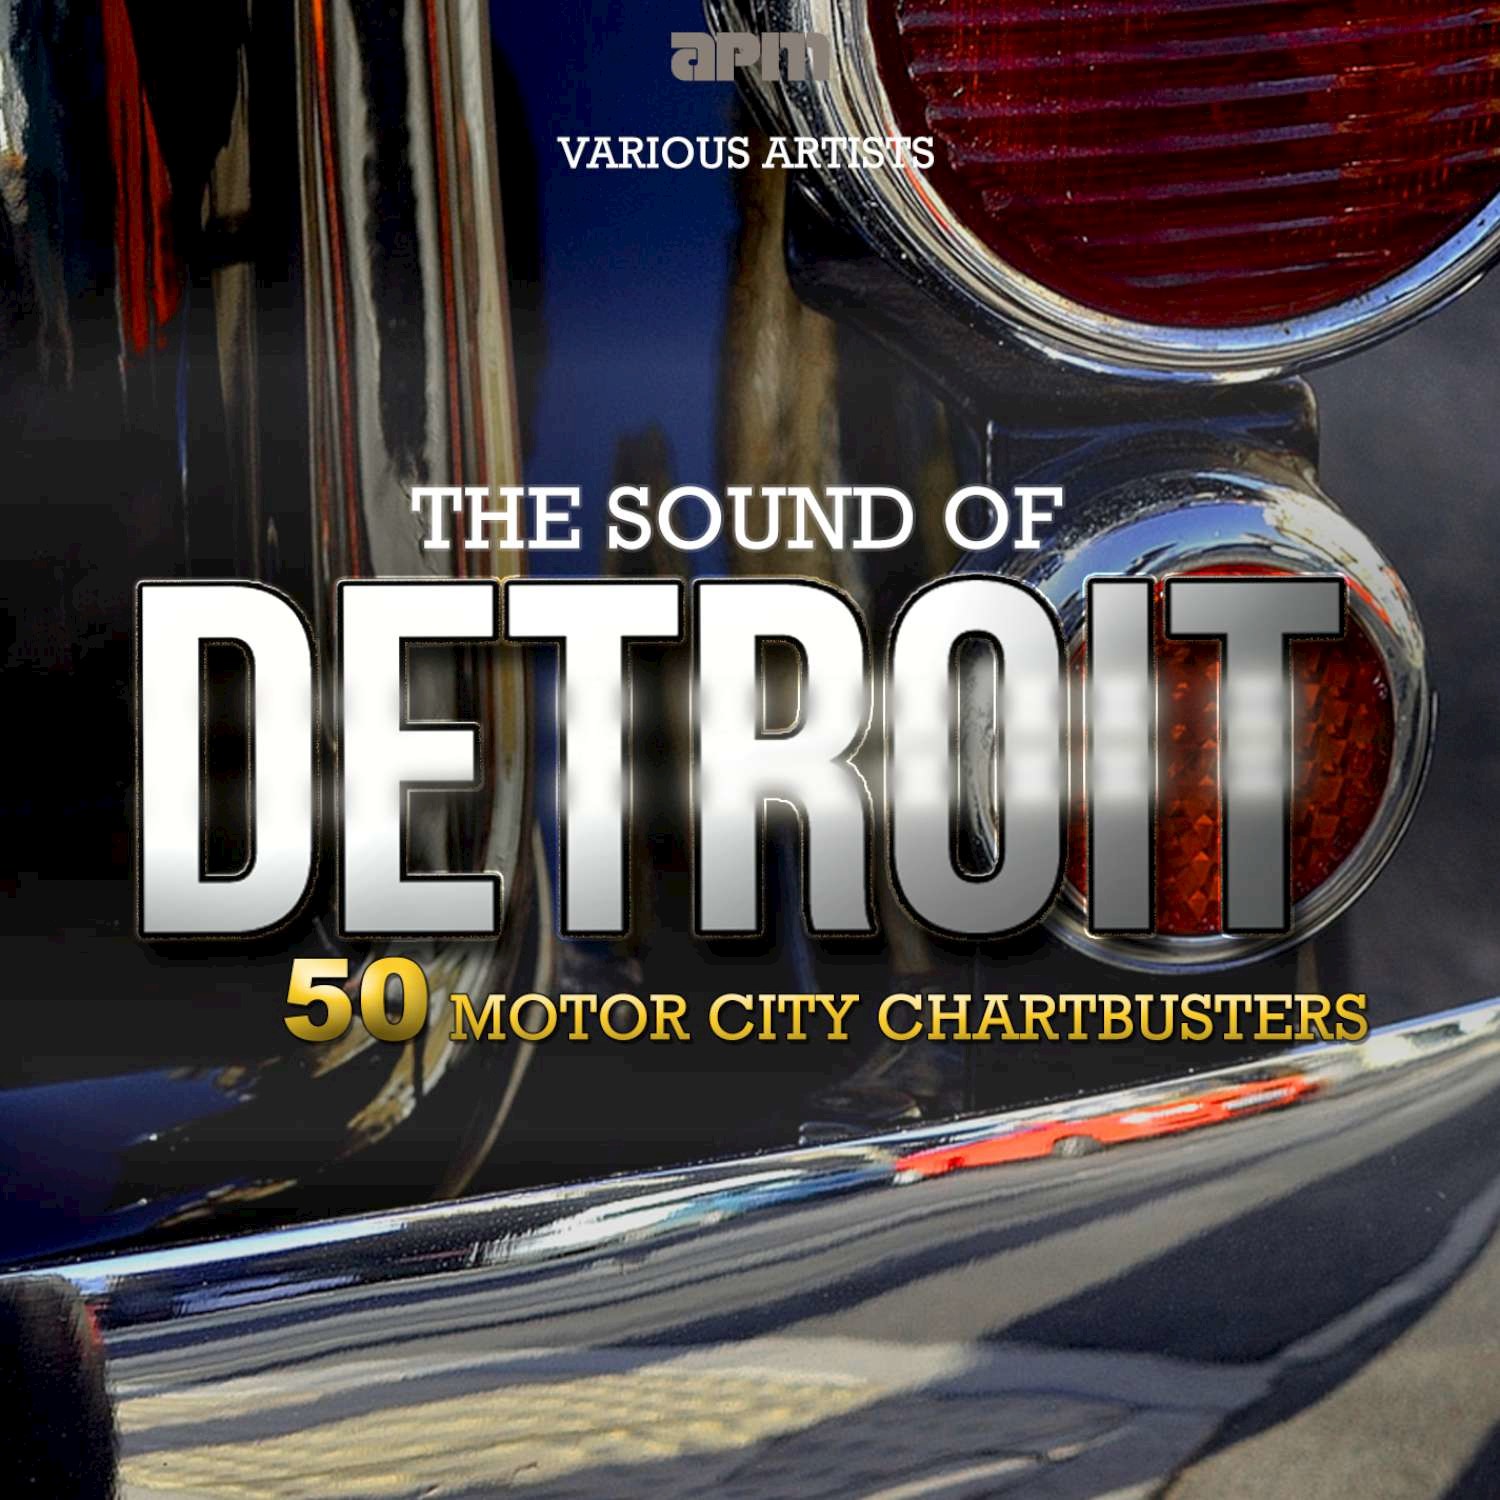 The Sound of Detroit - 50 Motor City Chartbusters